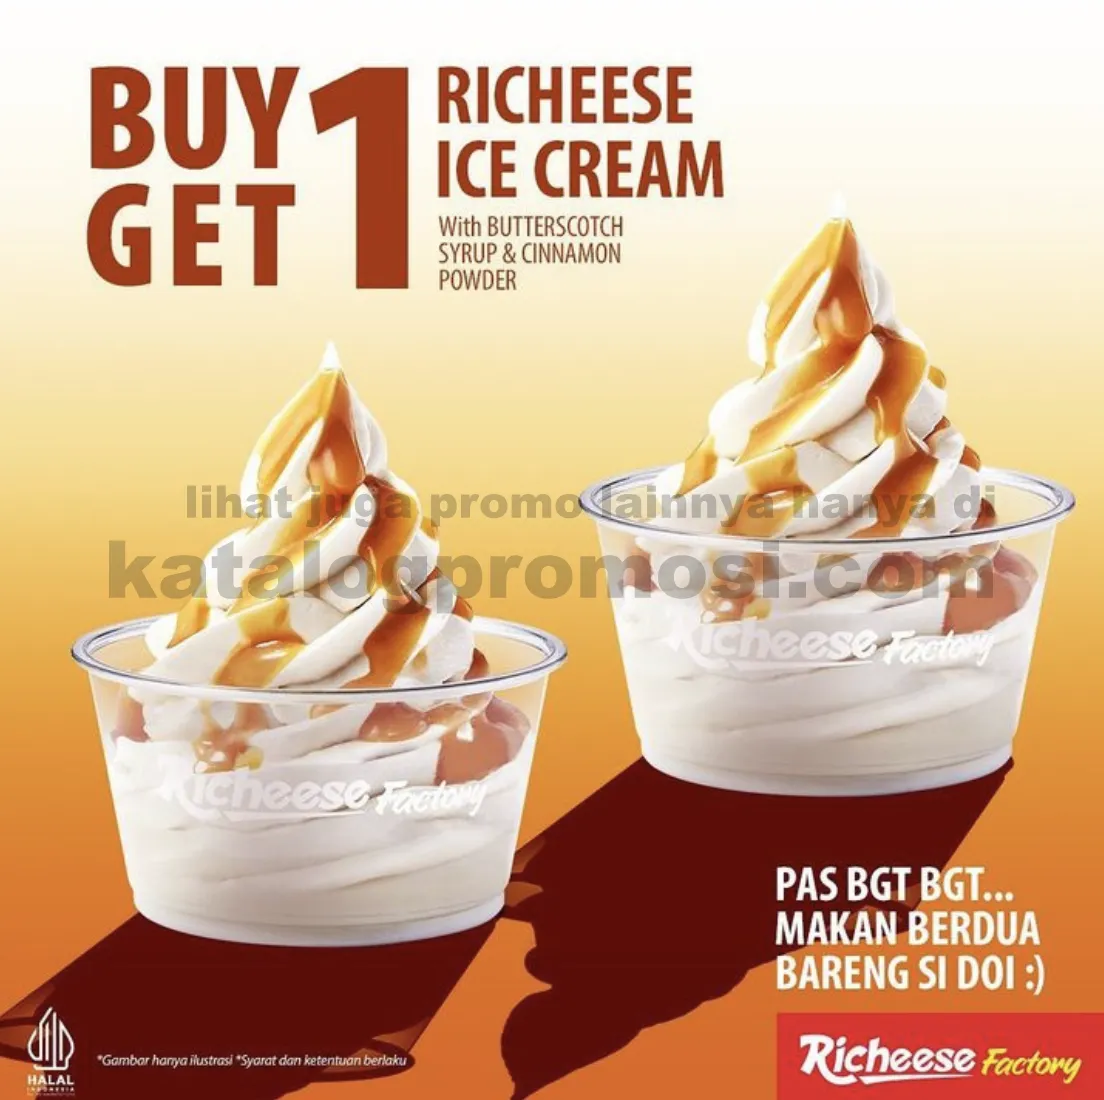 RICHEESE FACTORY Promo Buy 1 Get 1 Richeese ice Cream Fries* with Butterscotch Syrup dan Cinnamon Powder